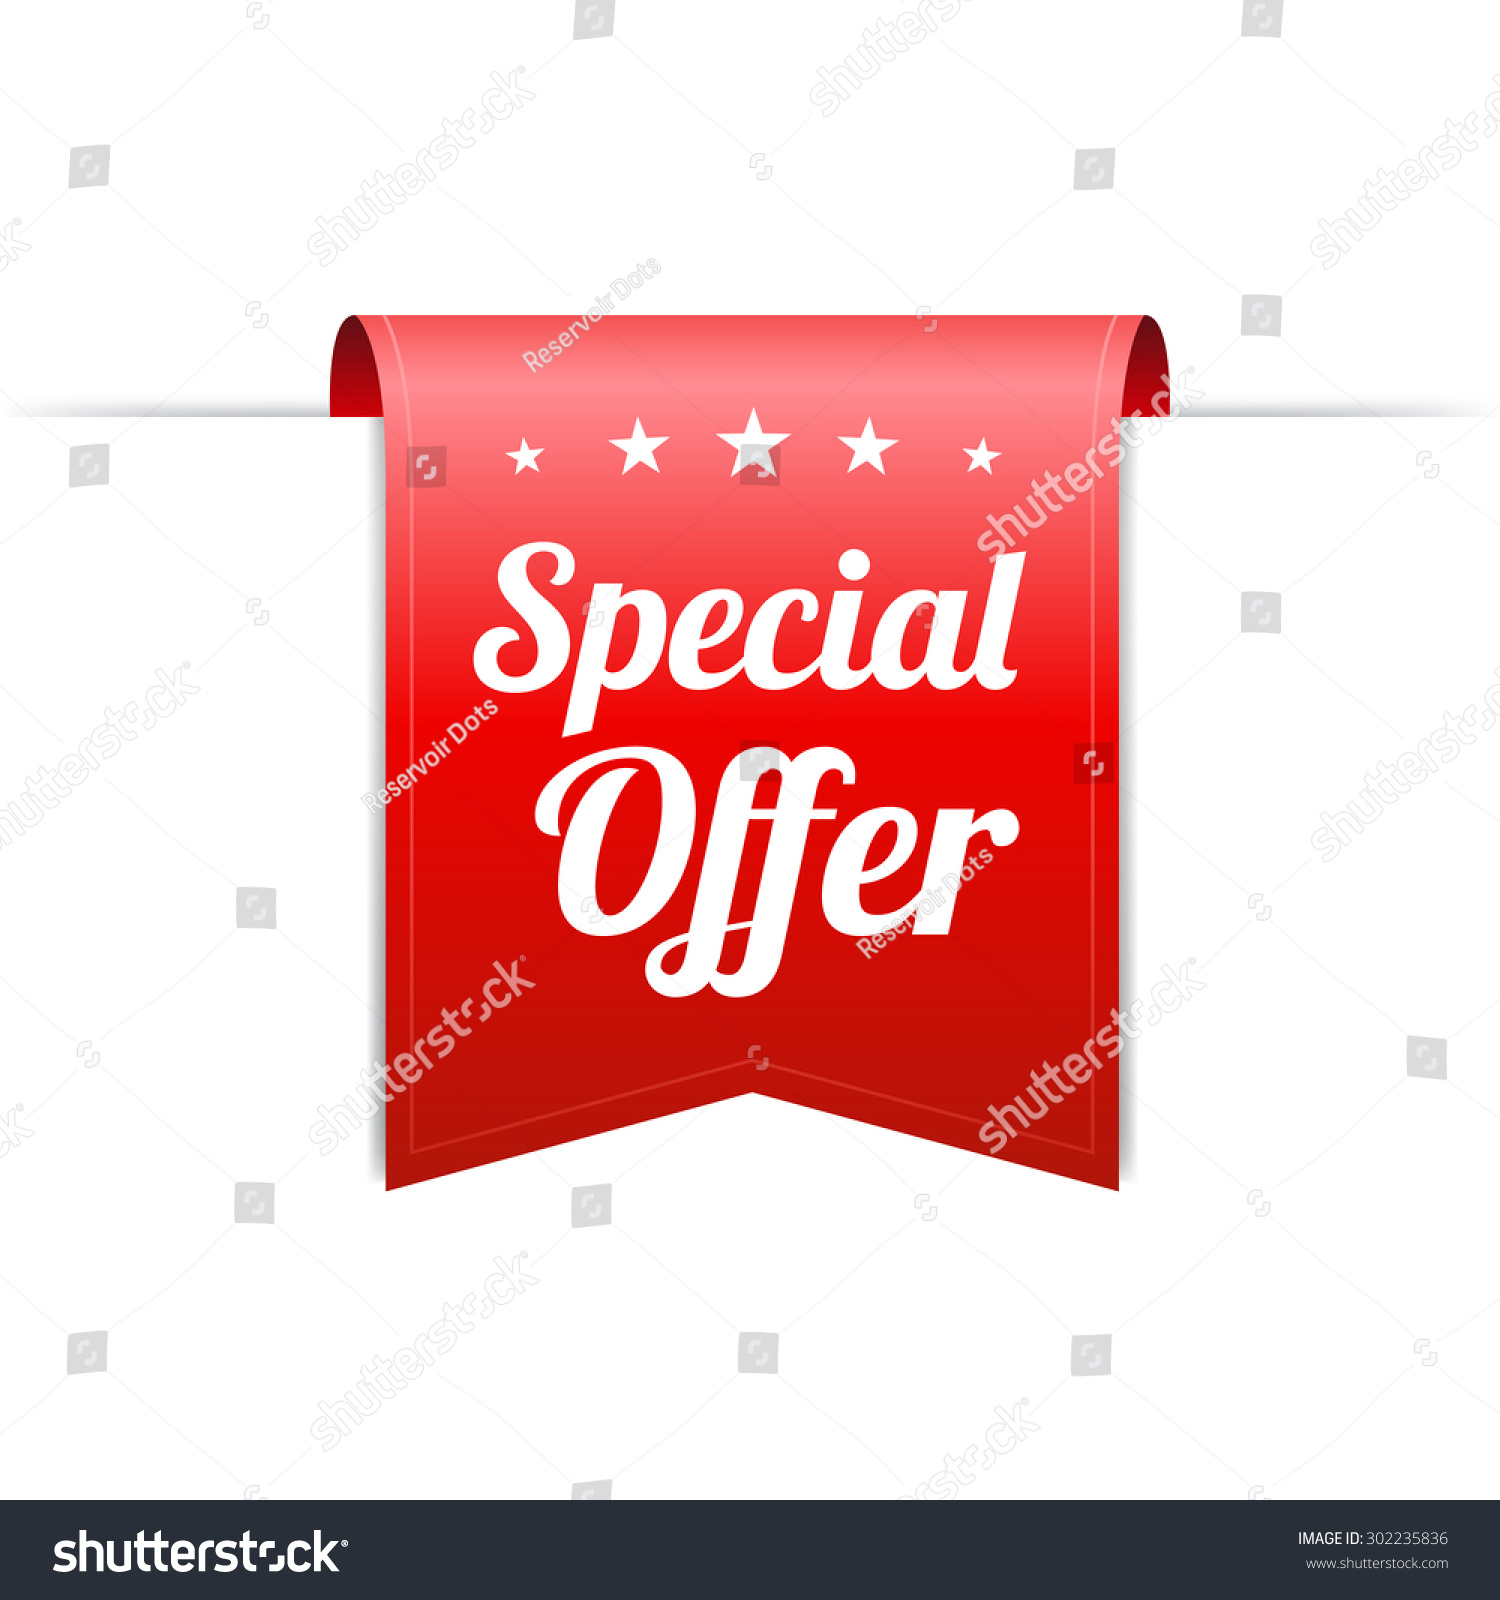 Special Offer Red Label #302235836